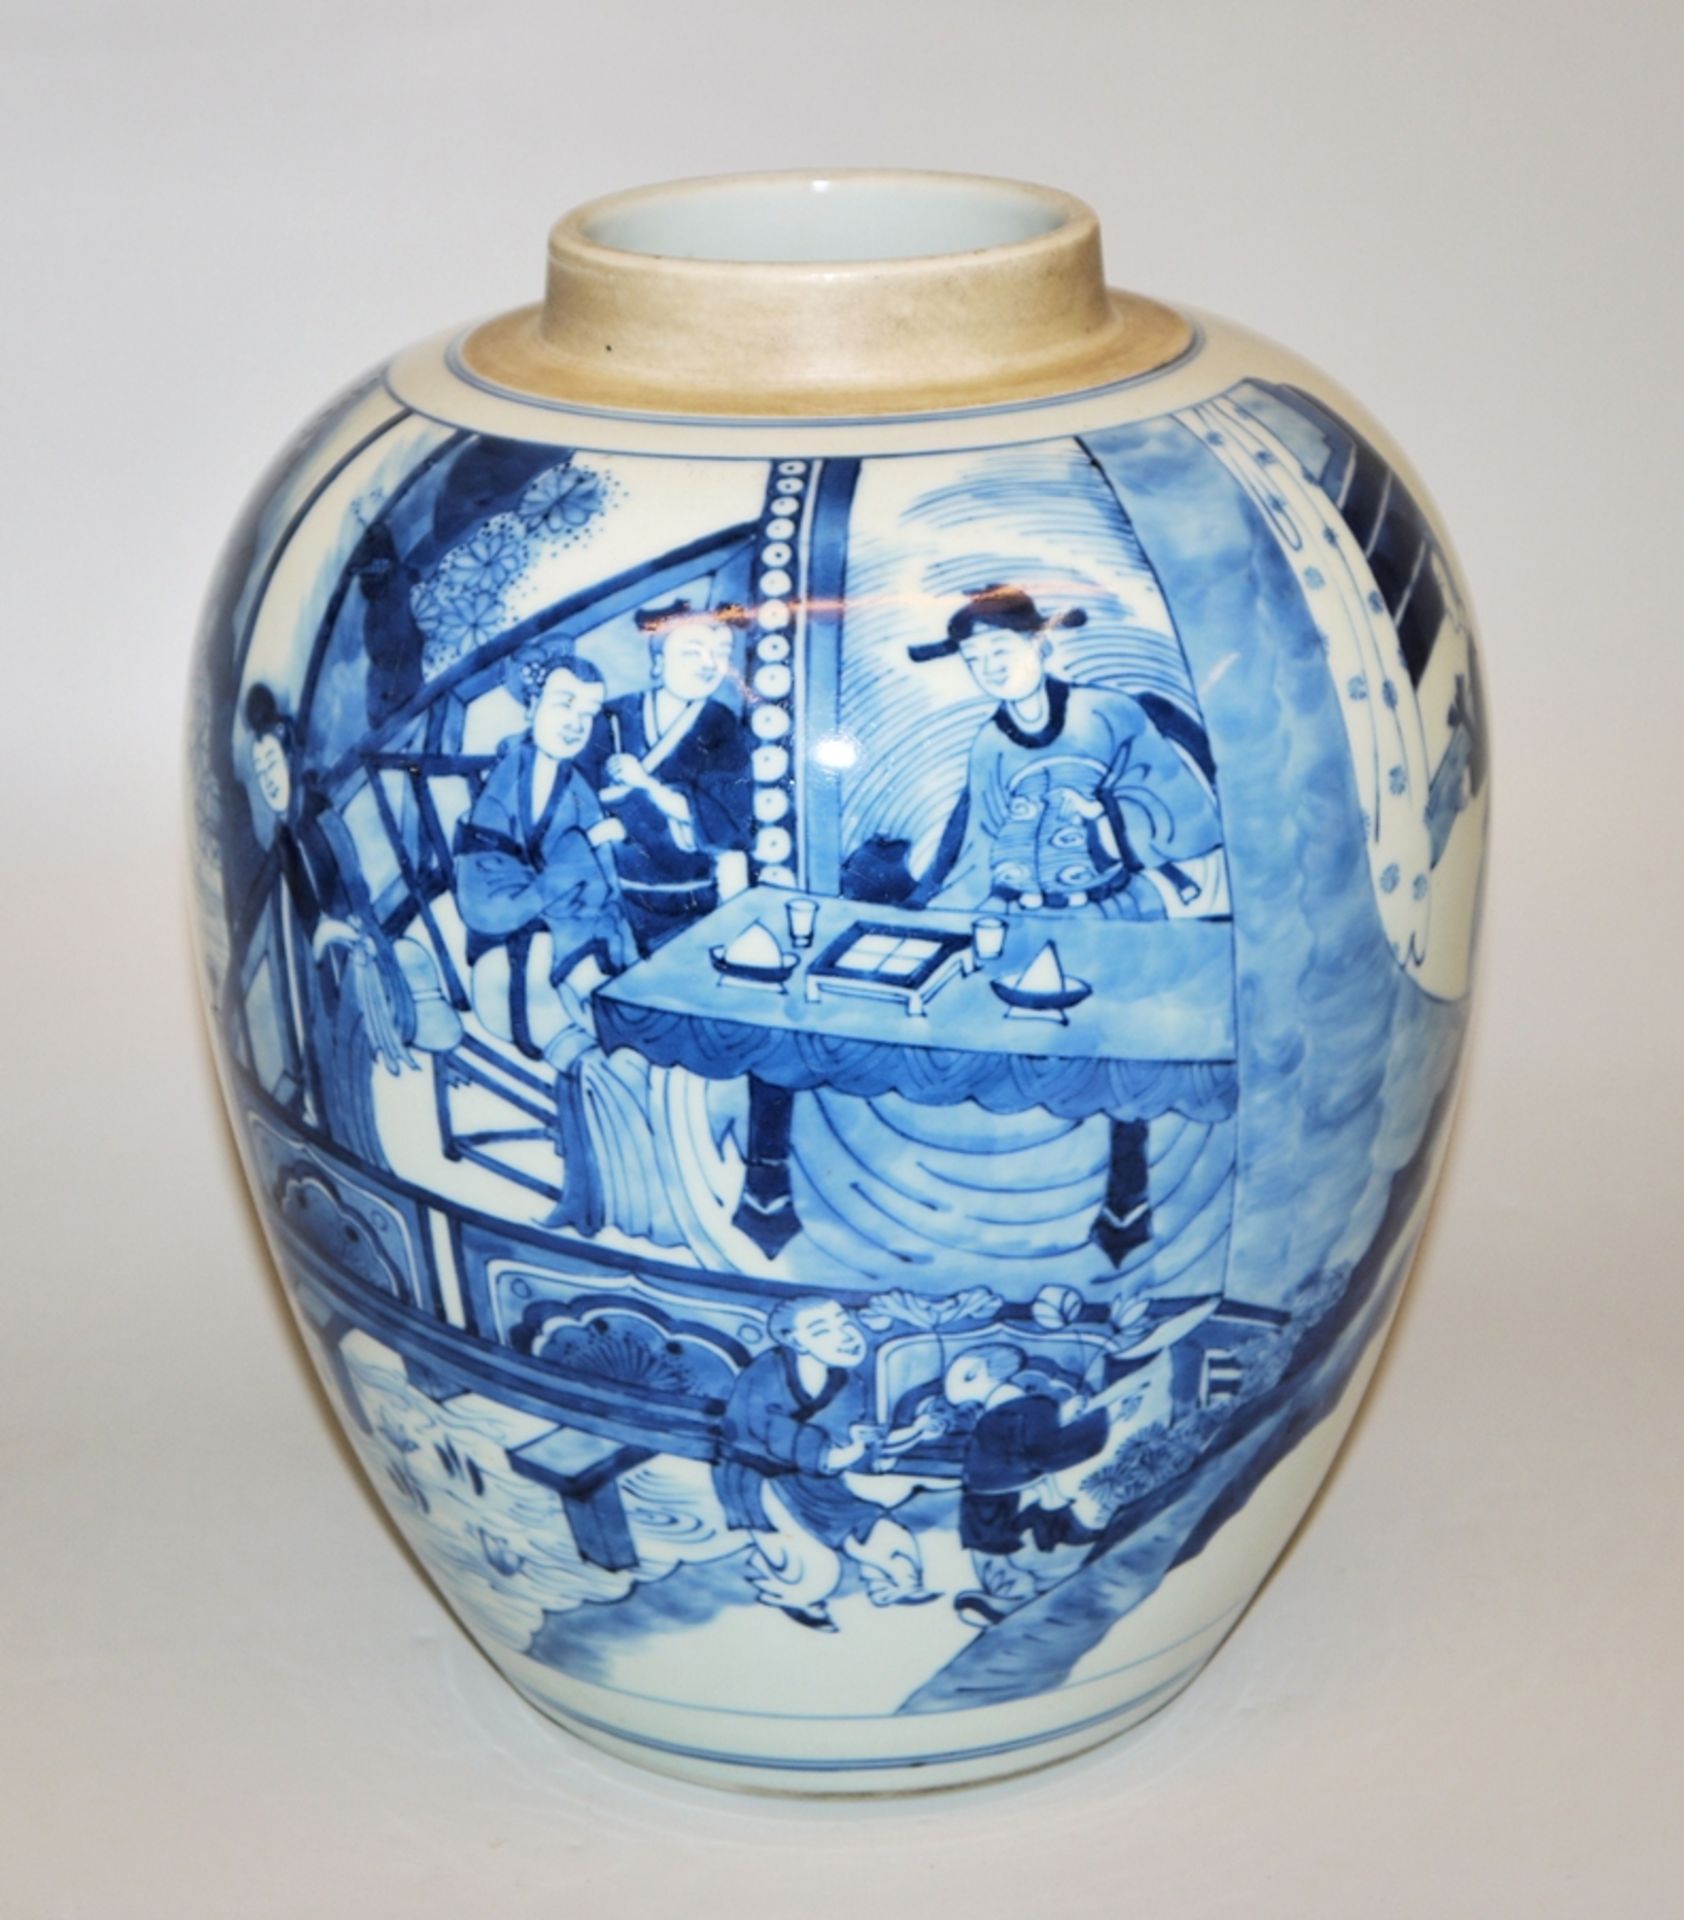 Large blue and white pot with auspicious scenery, Republic period, China c. 1900